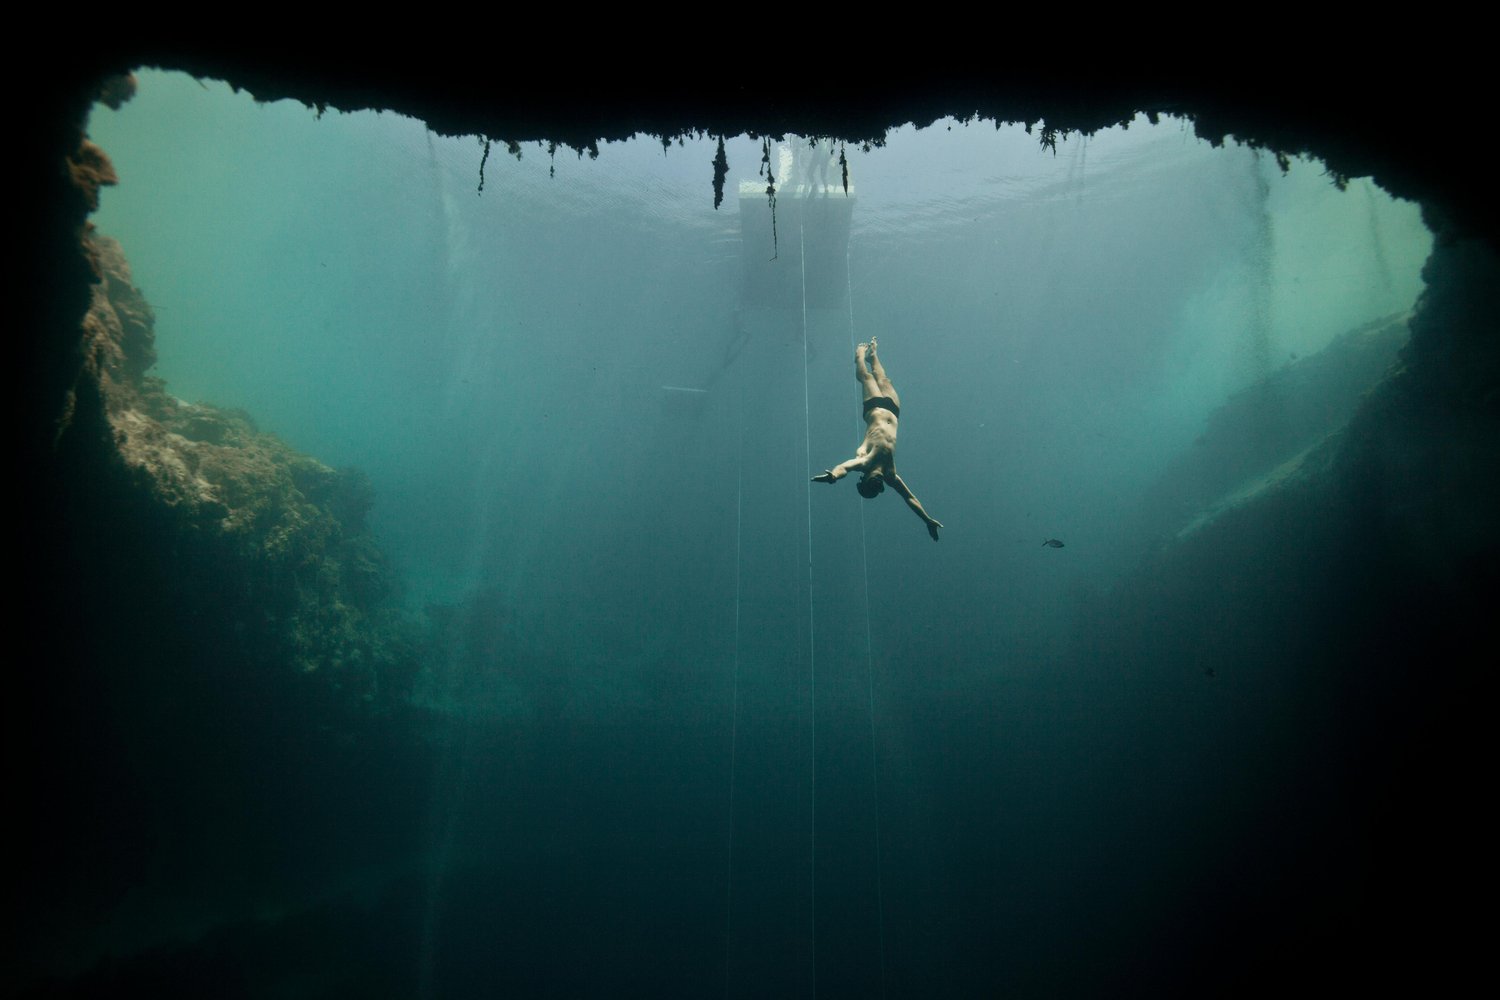 Diving Photos Incredible Image To Inspire